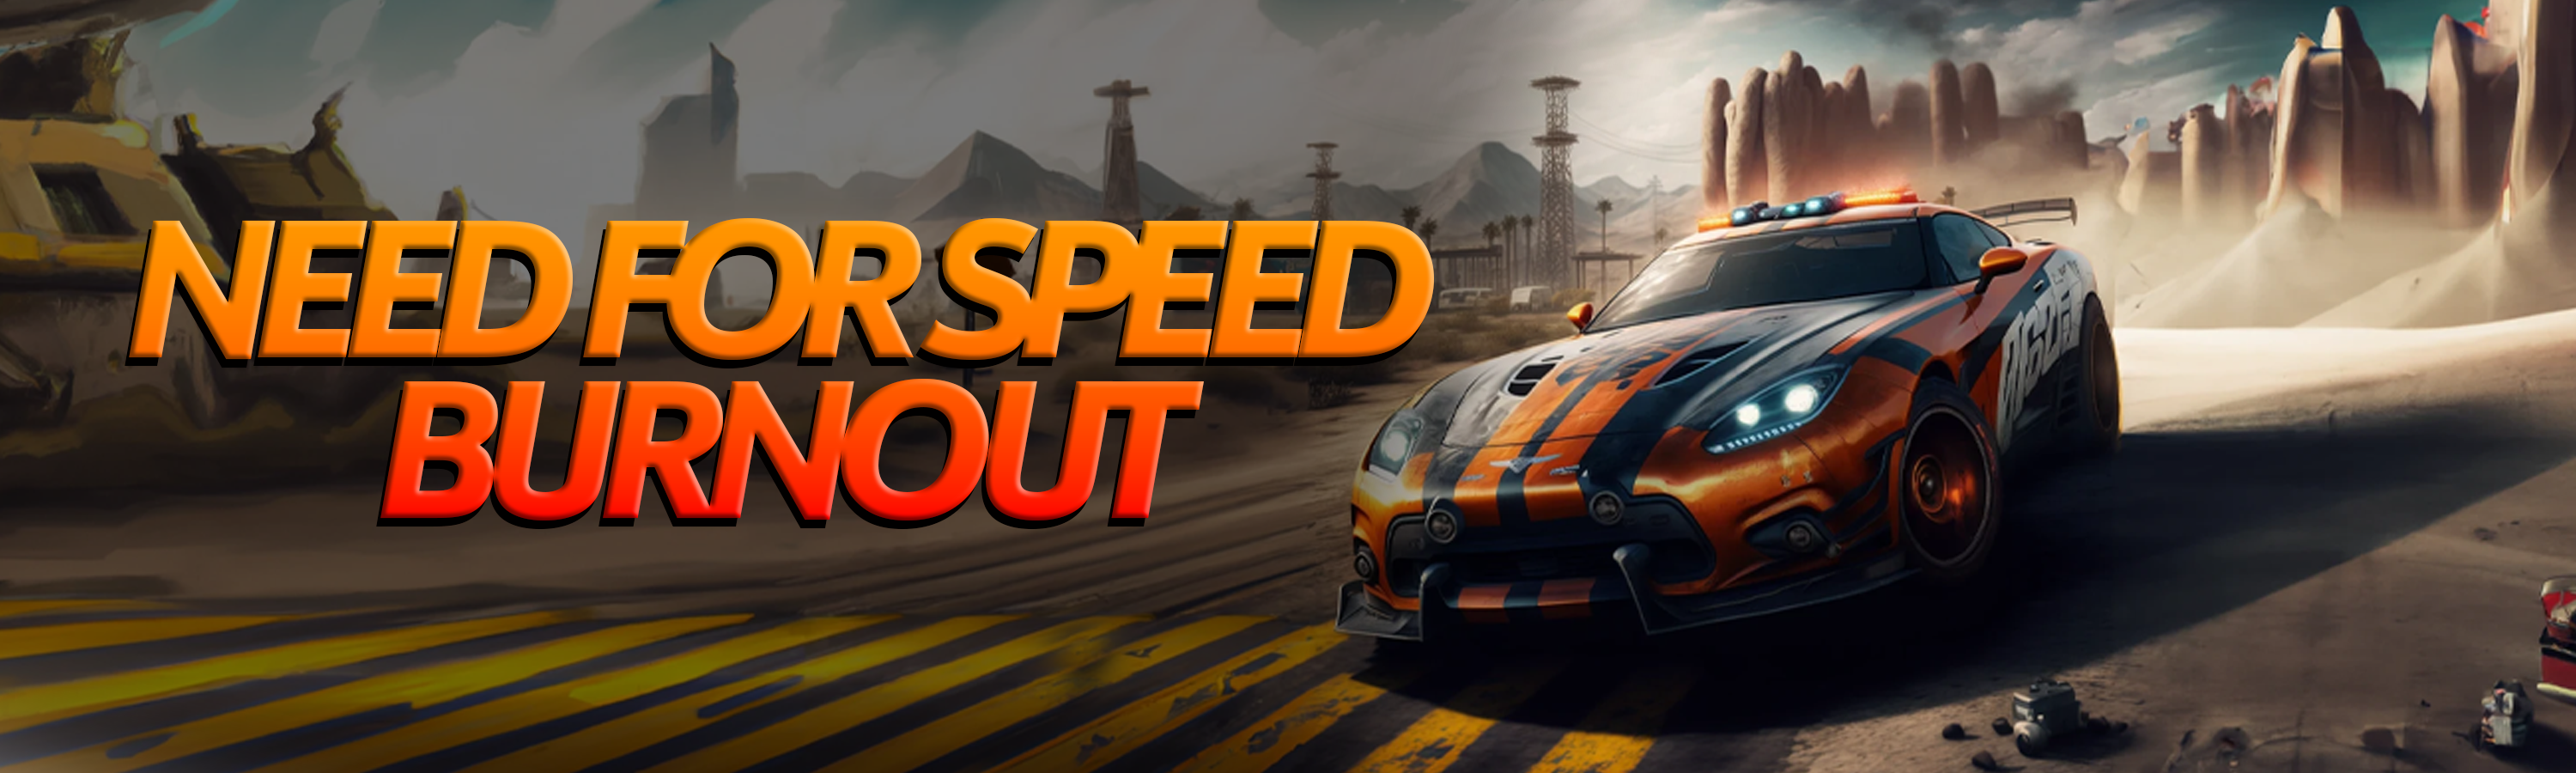 Need For Speed Burnout